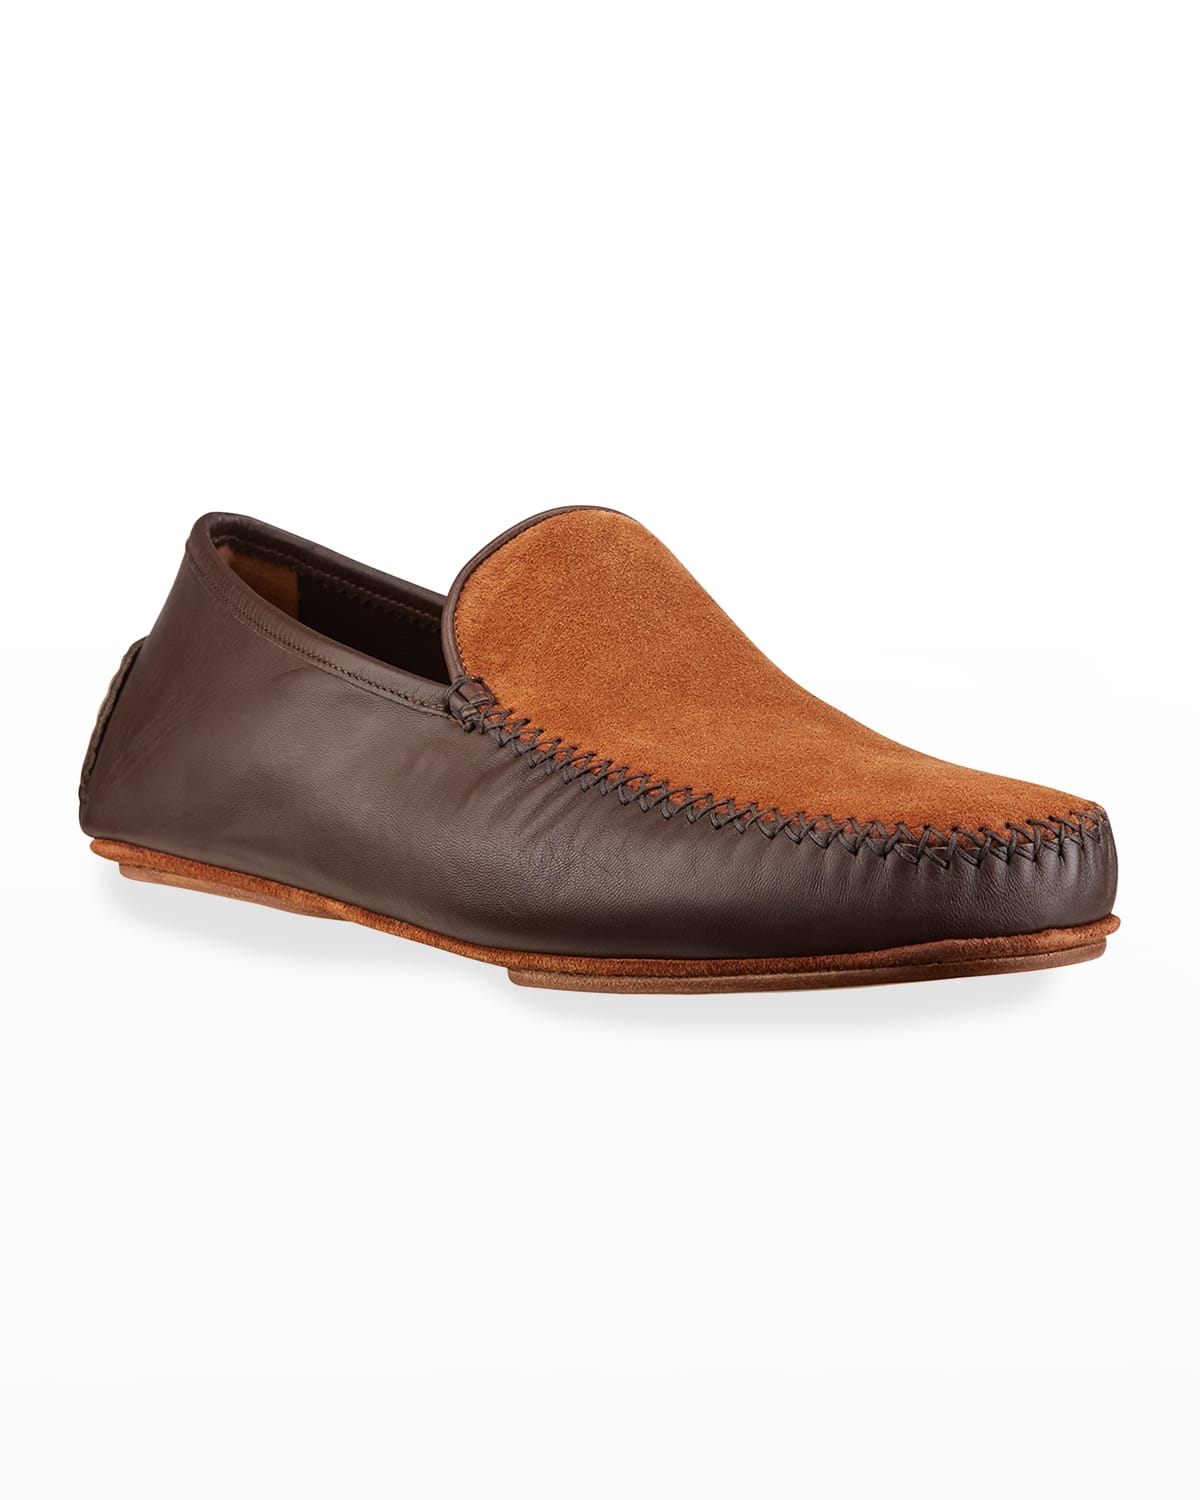 Men's Mayfair Two-Tone Suede and Leather Slippers